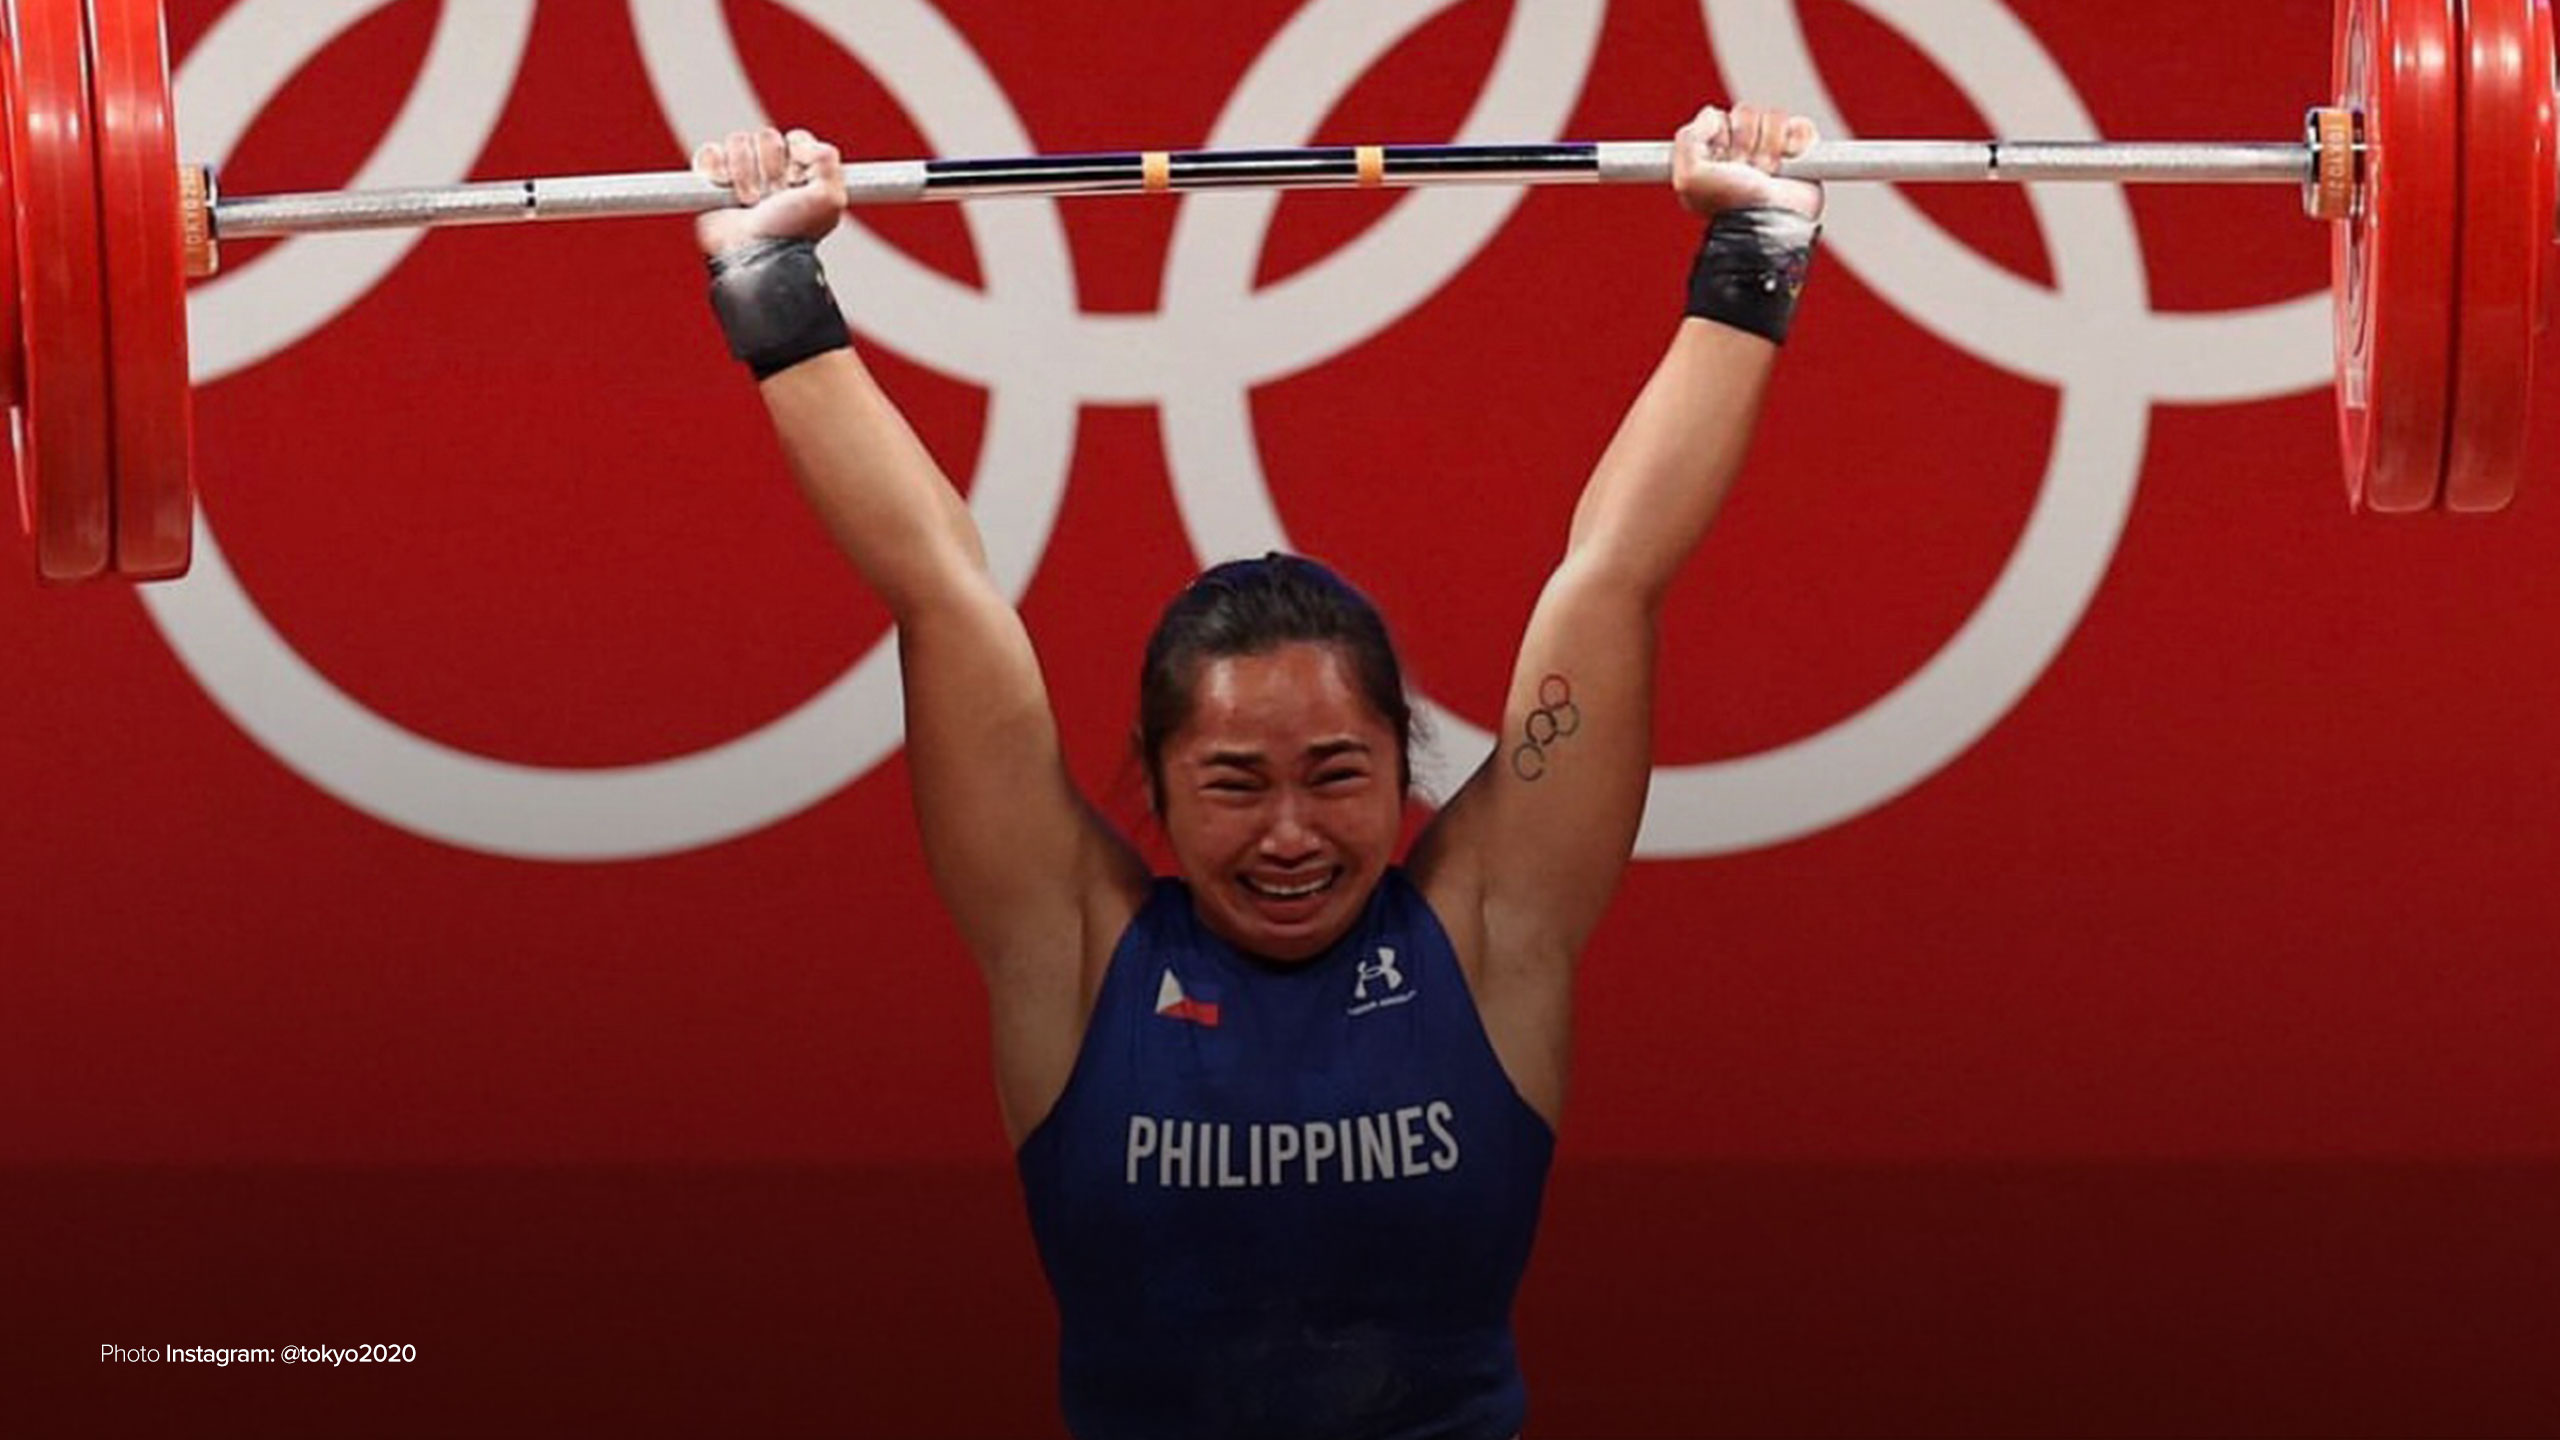 Lifting the nation: The rise of Philippine weightlifting - The Game